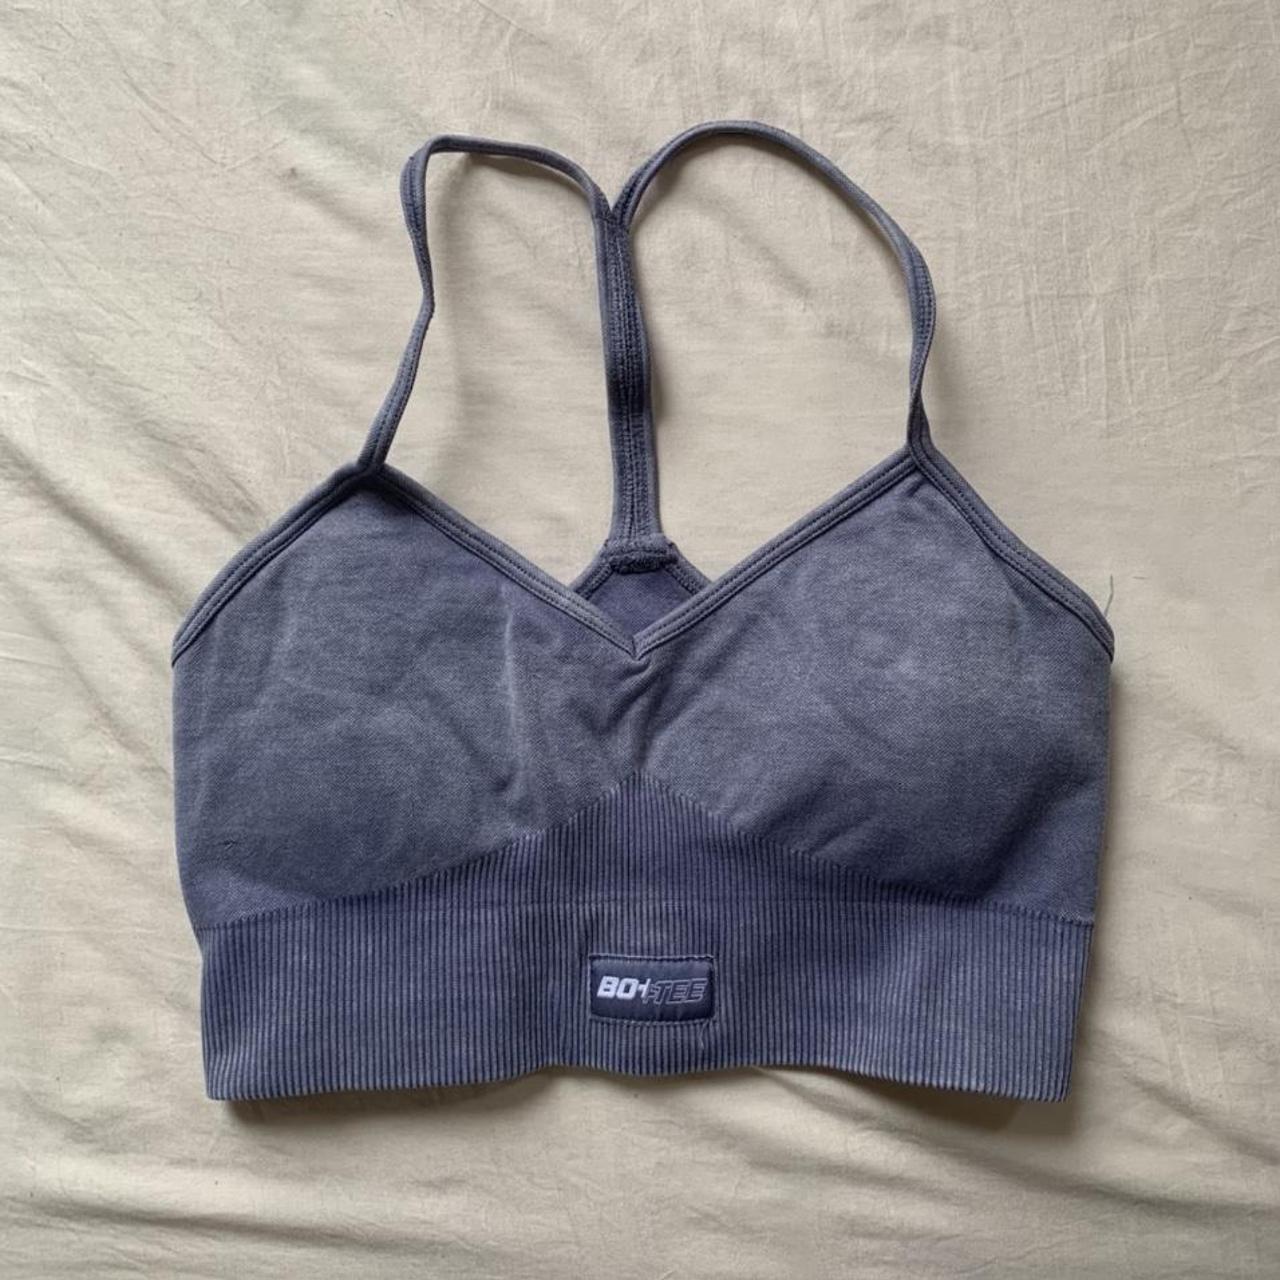 Bo and Tee sports bra in navy blue Brand new/ never... - Depop